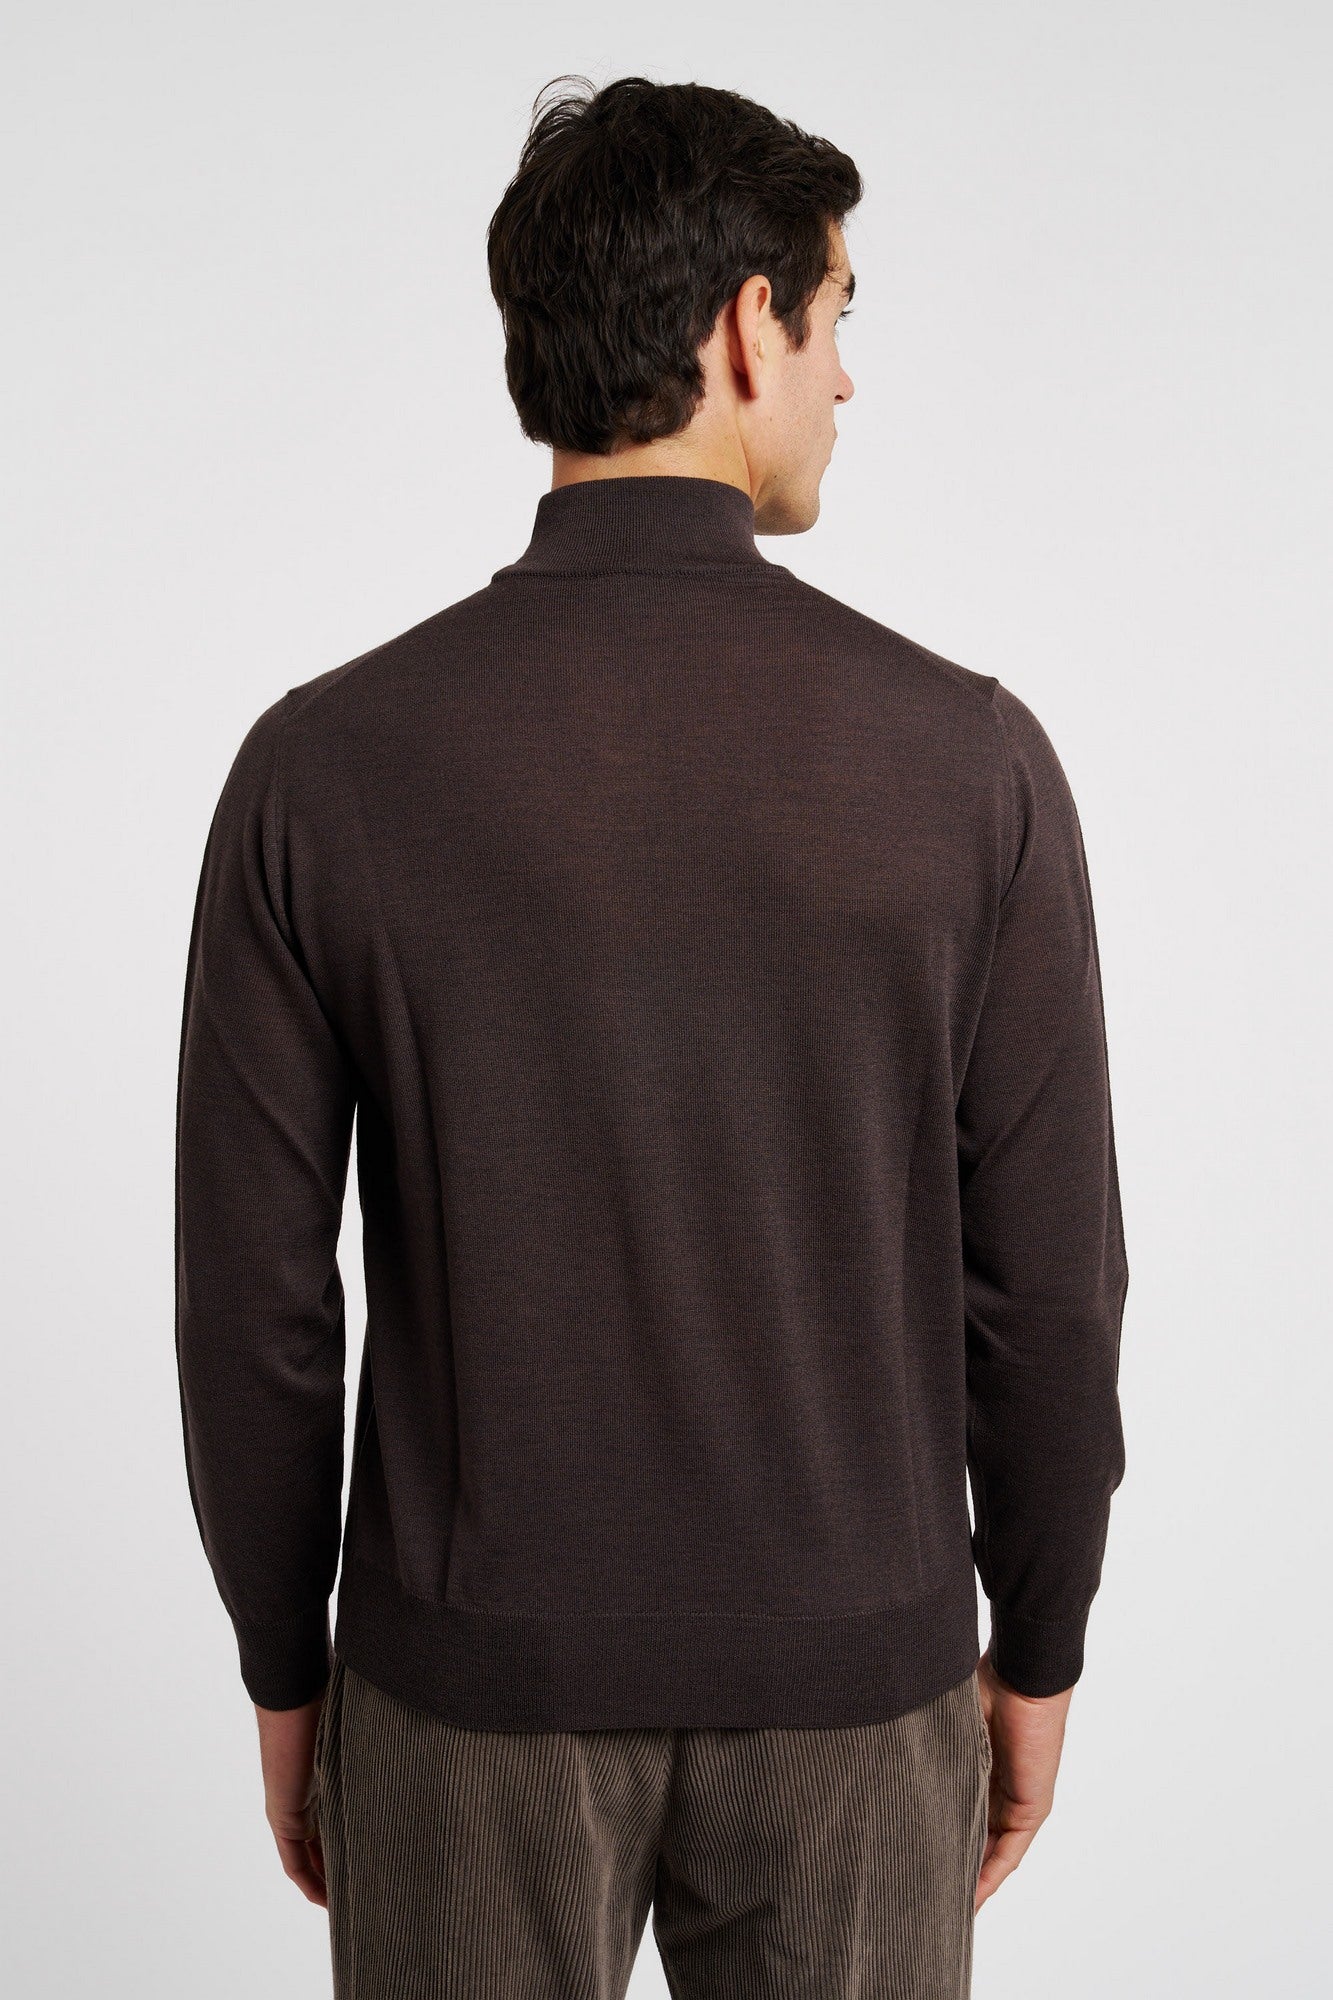 Canali Turtleneck in Brown Extra Fine Wool - 5